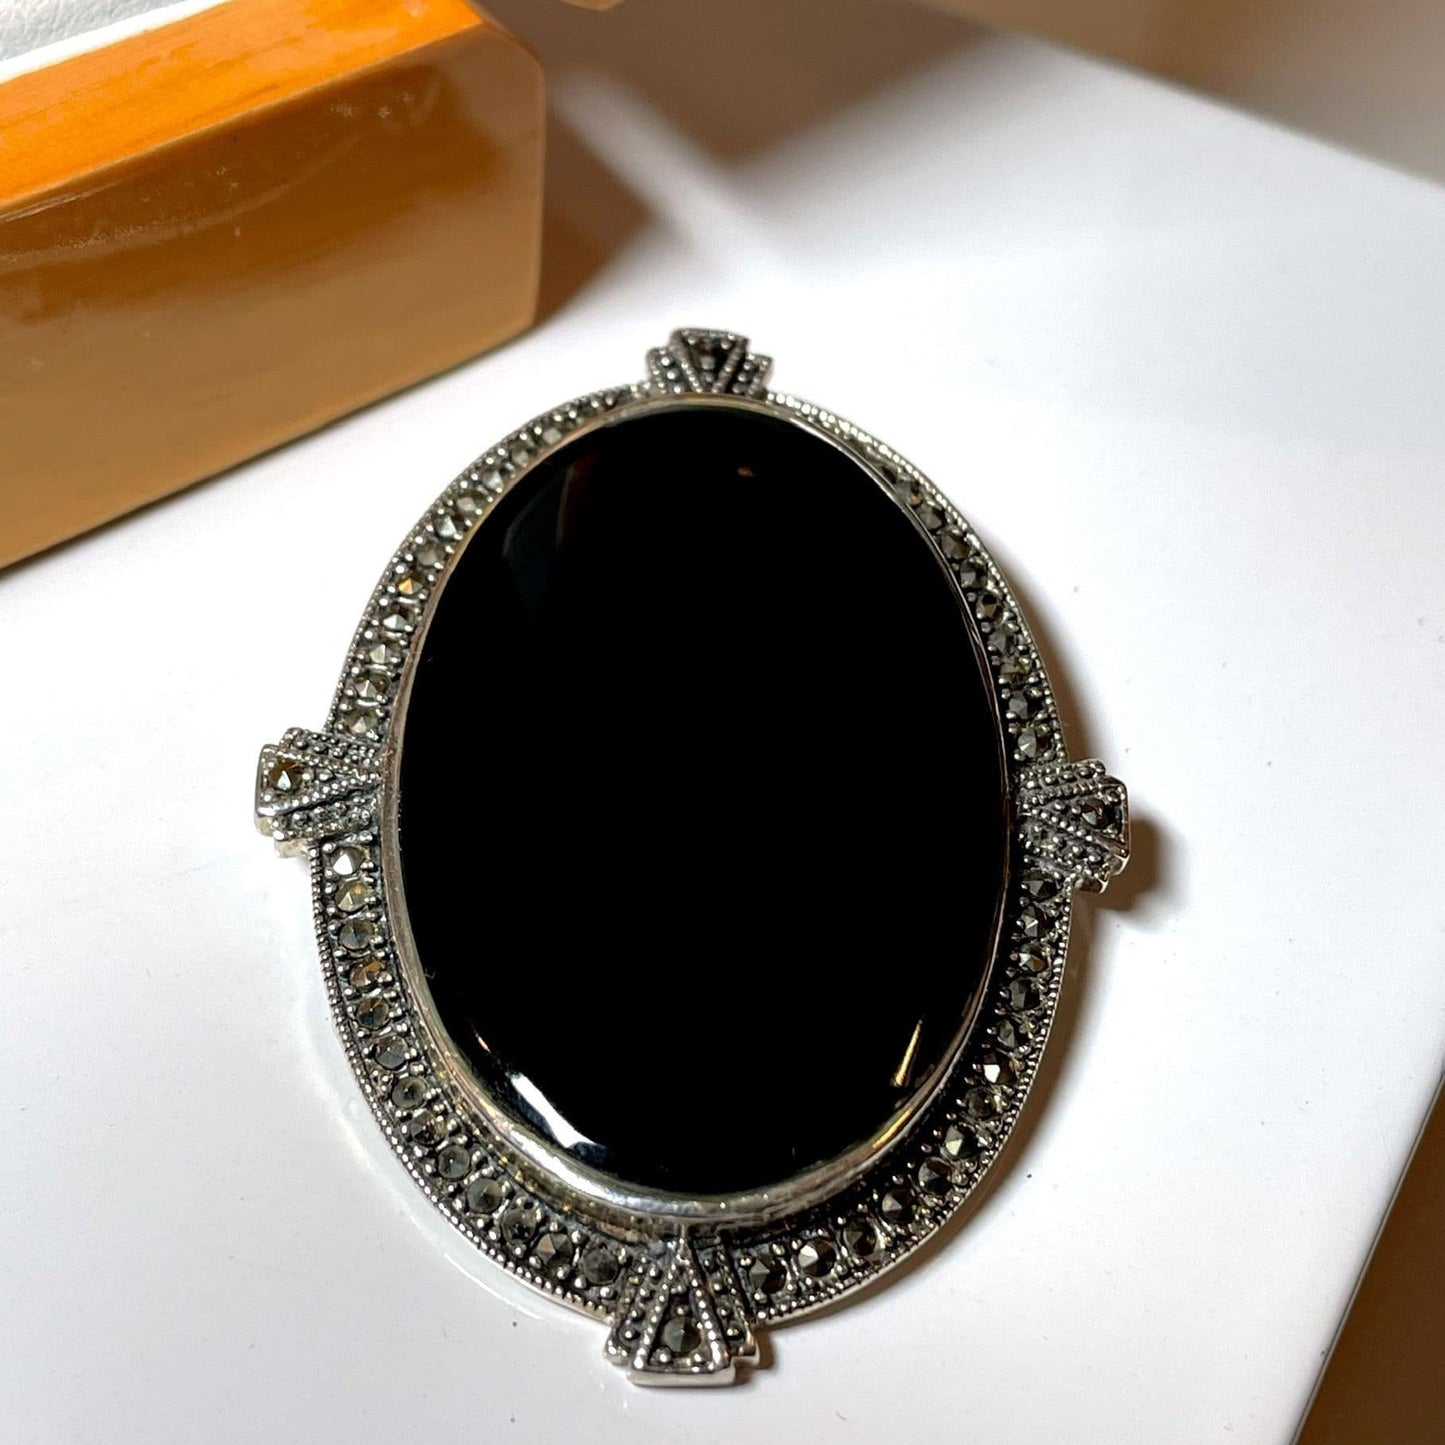 Large Black Oval Onyx And Marcasite Brooch Sterling Silver